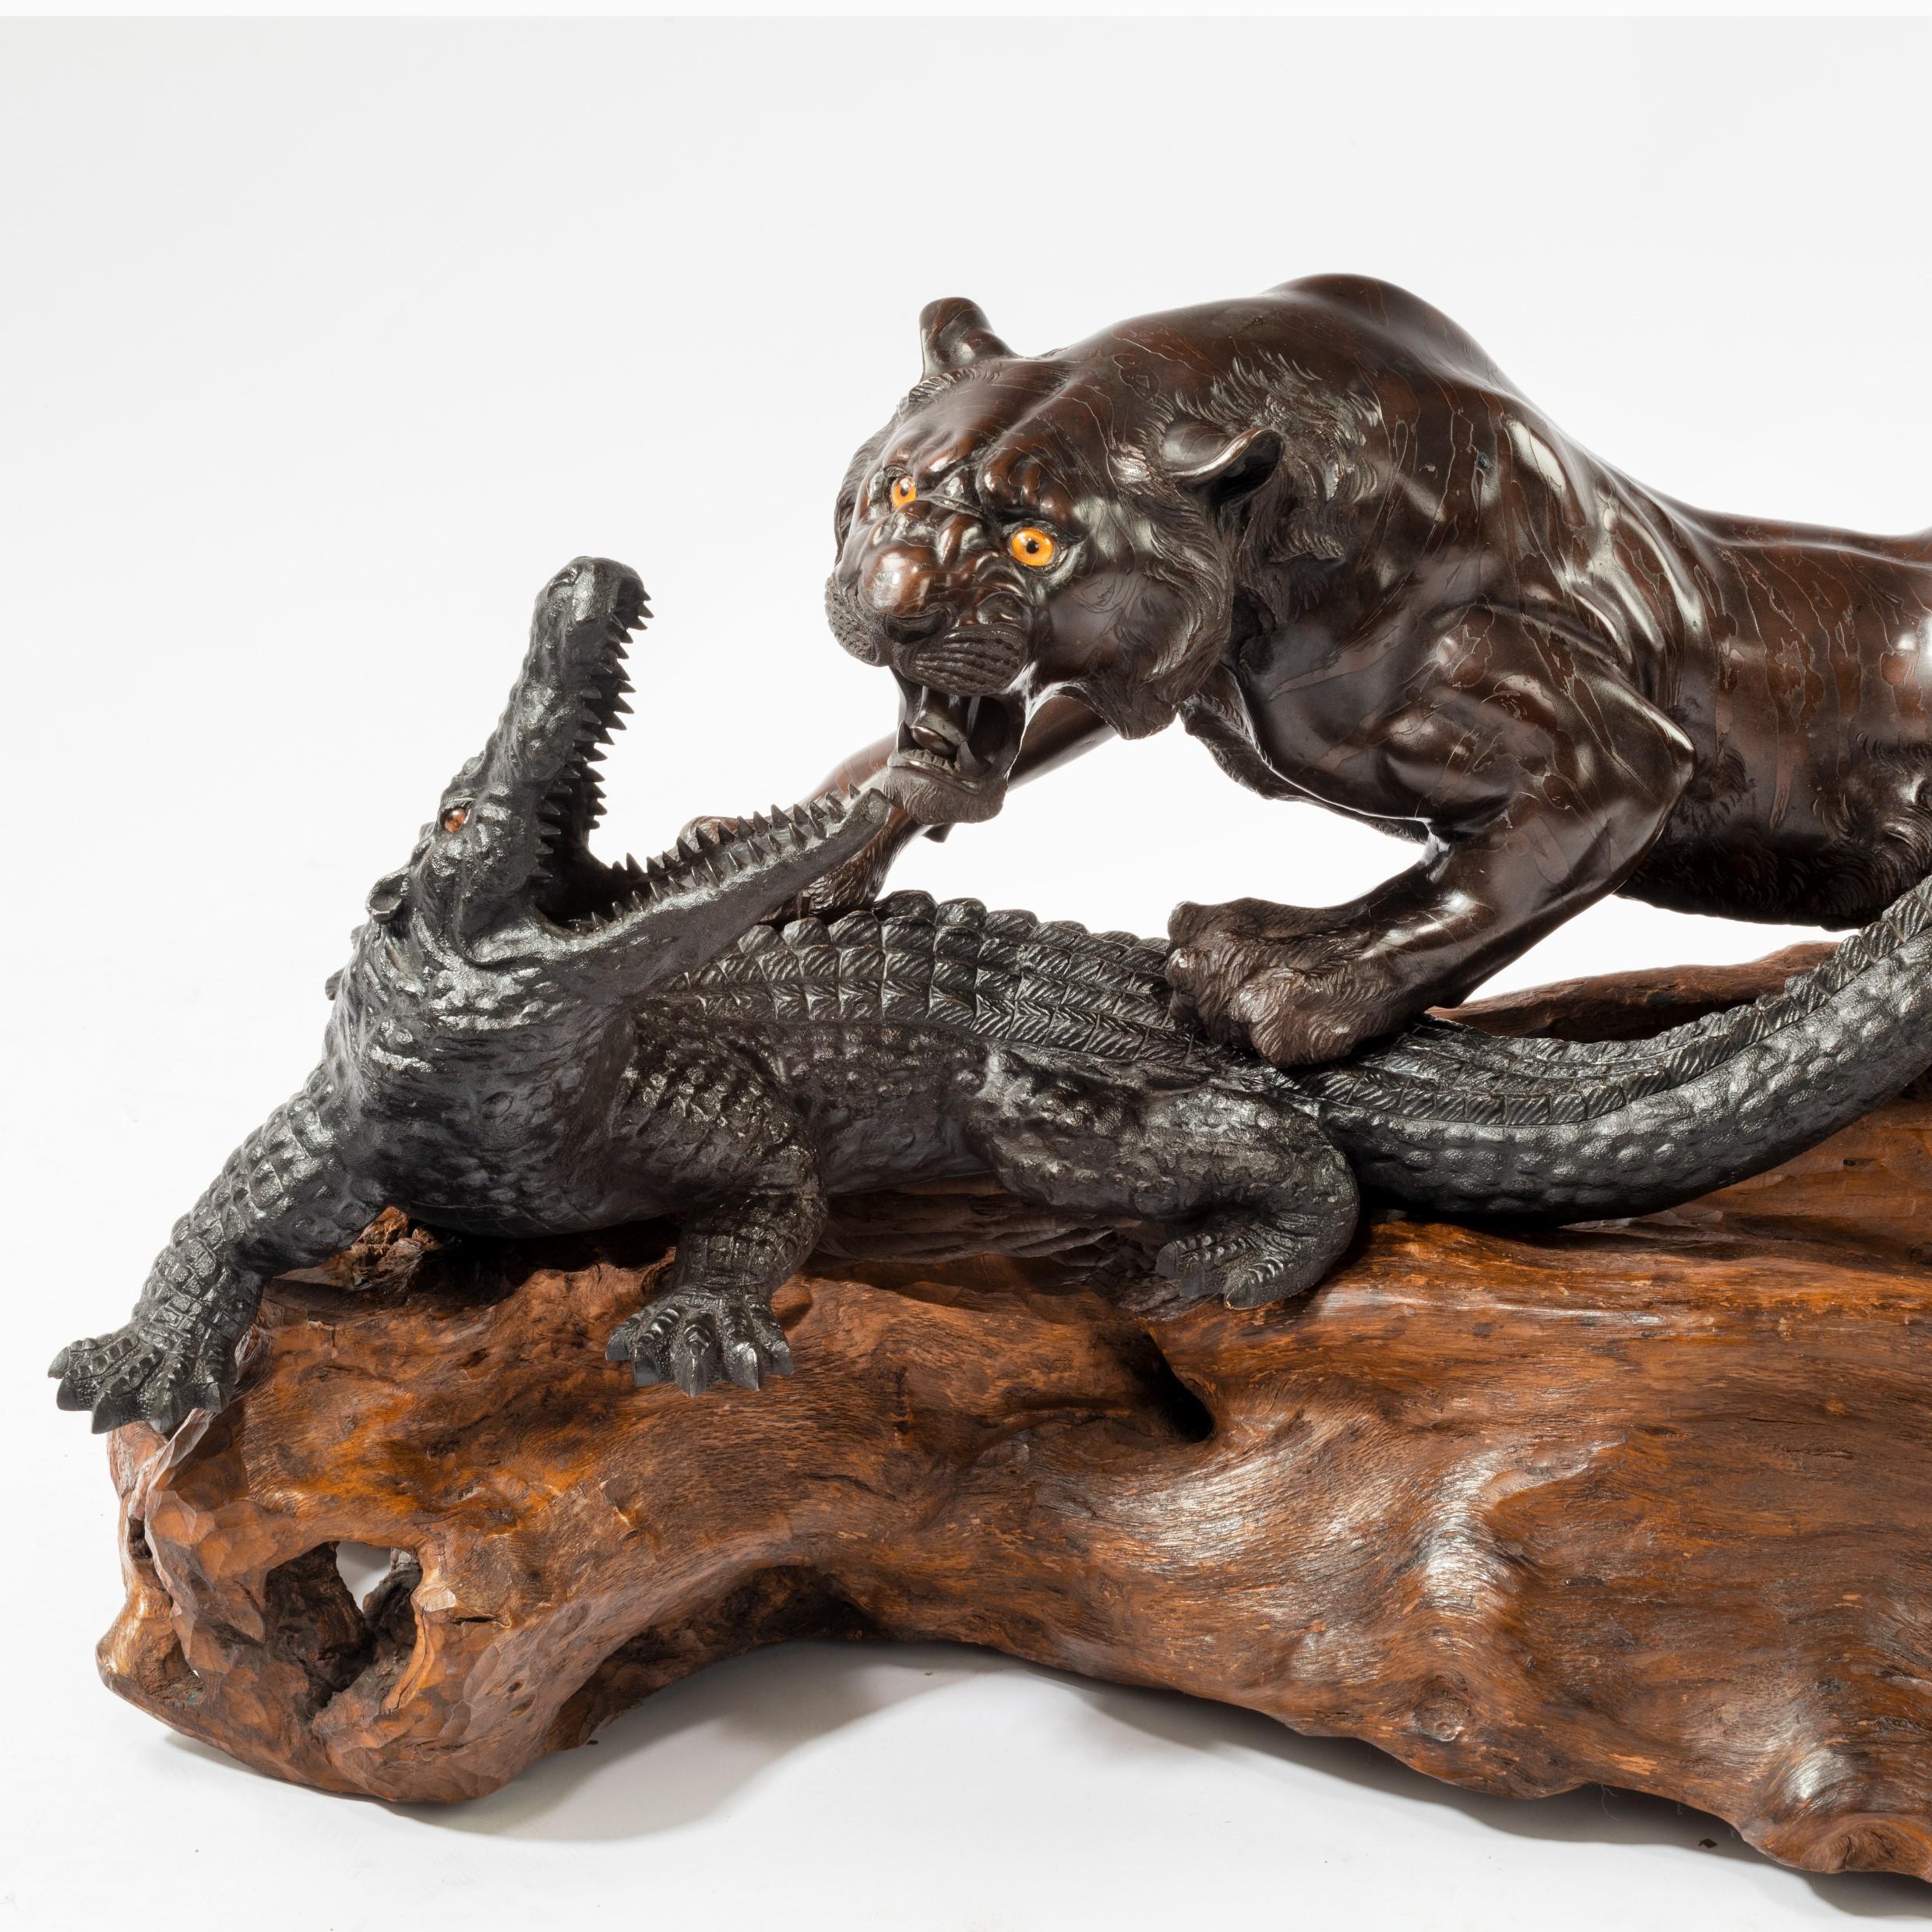 An unusual Meiji period bronze of a tiger and an alligator by Genryusai Seiya, the creatures modelled separately with the tiger attempting to pin down the snapping alligator, the pelt of the tiger and the characteristic skin of the reptile